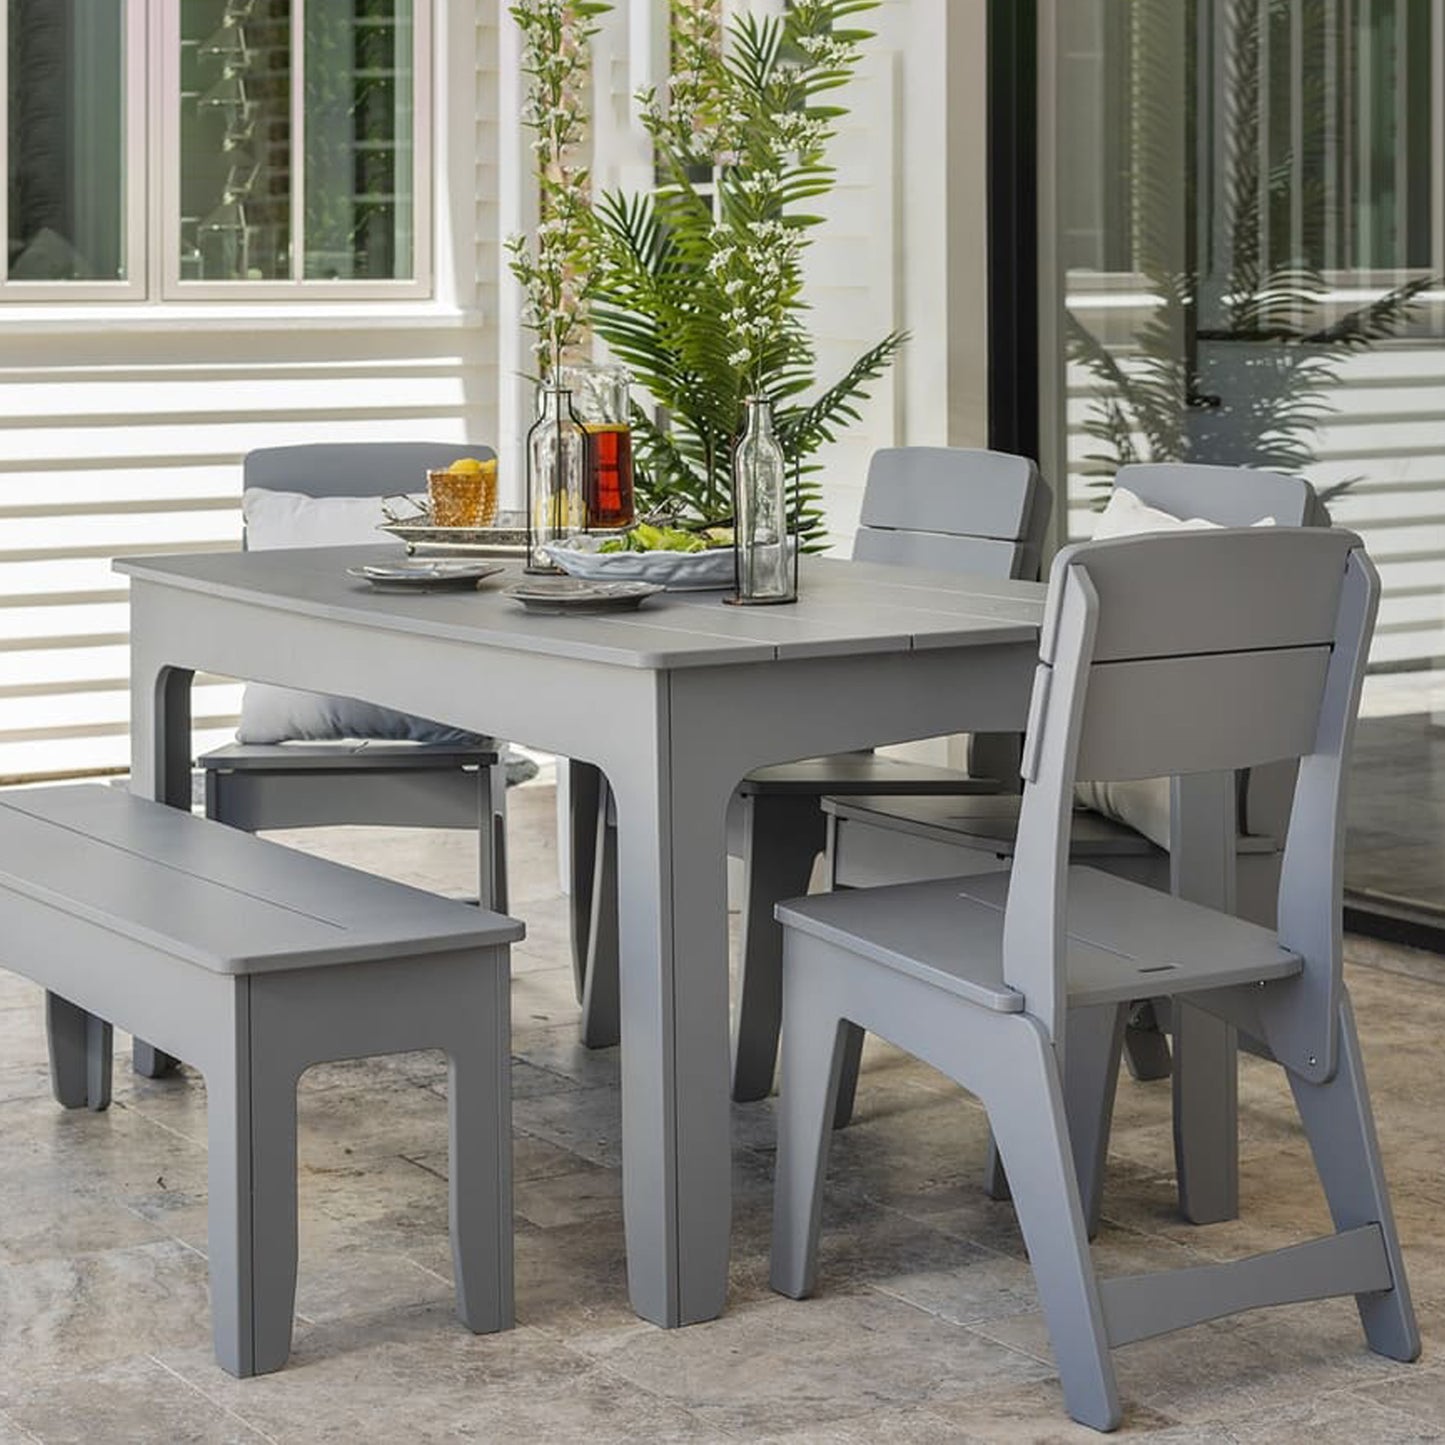 Ledge Lounger Mainstay Square Dining Table